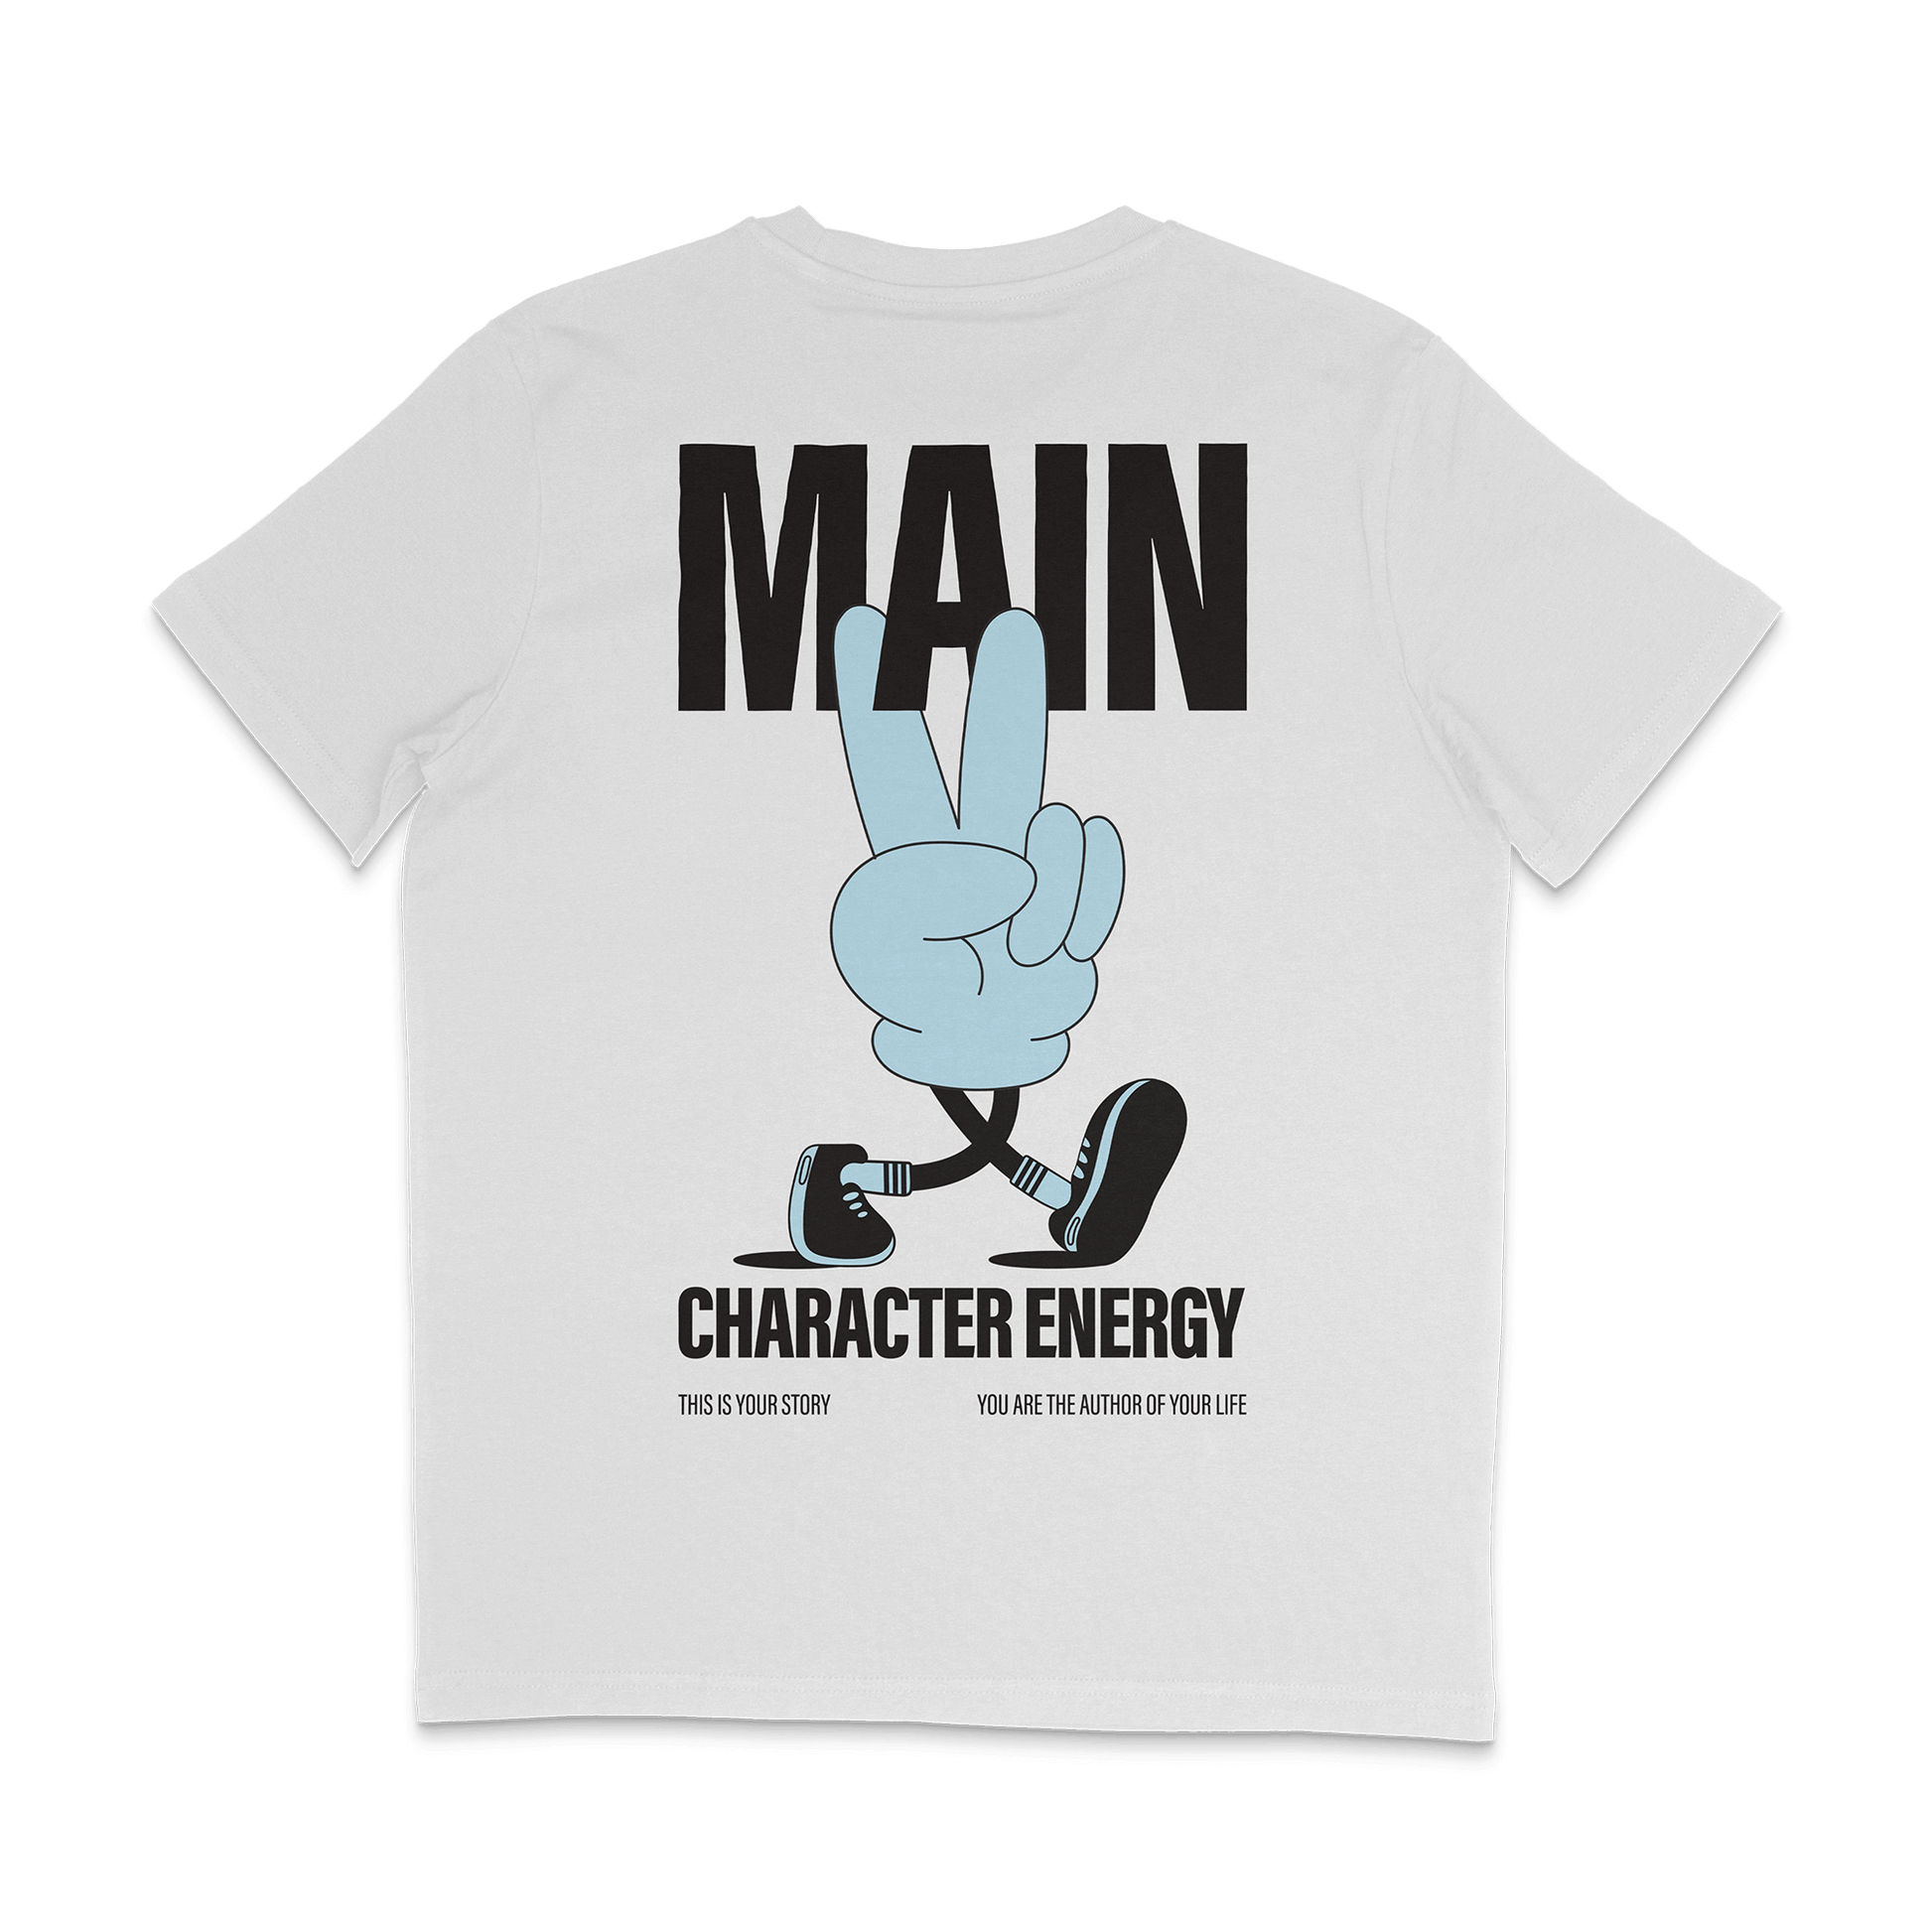 Main character energy tee in blue